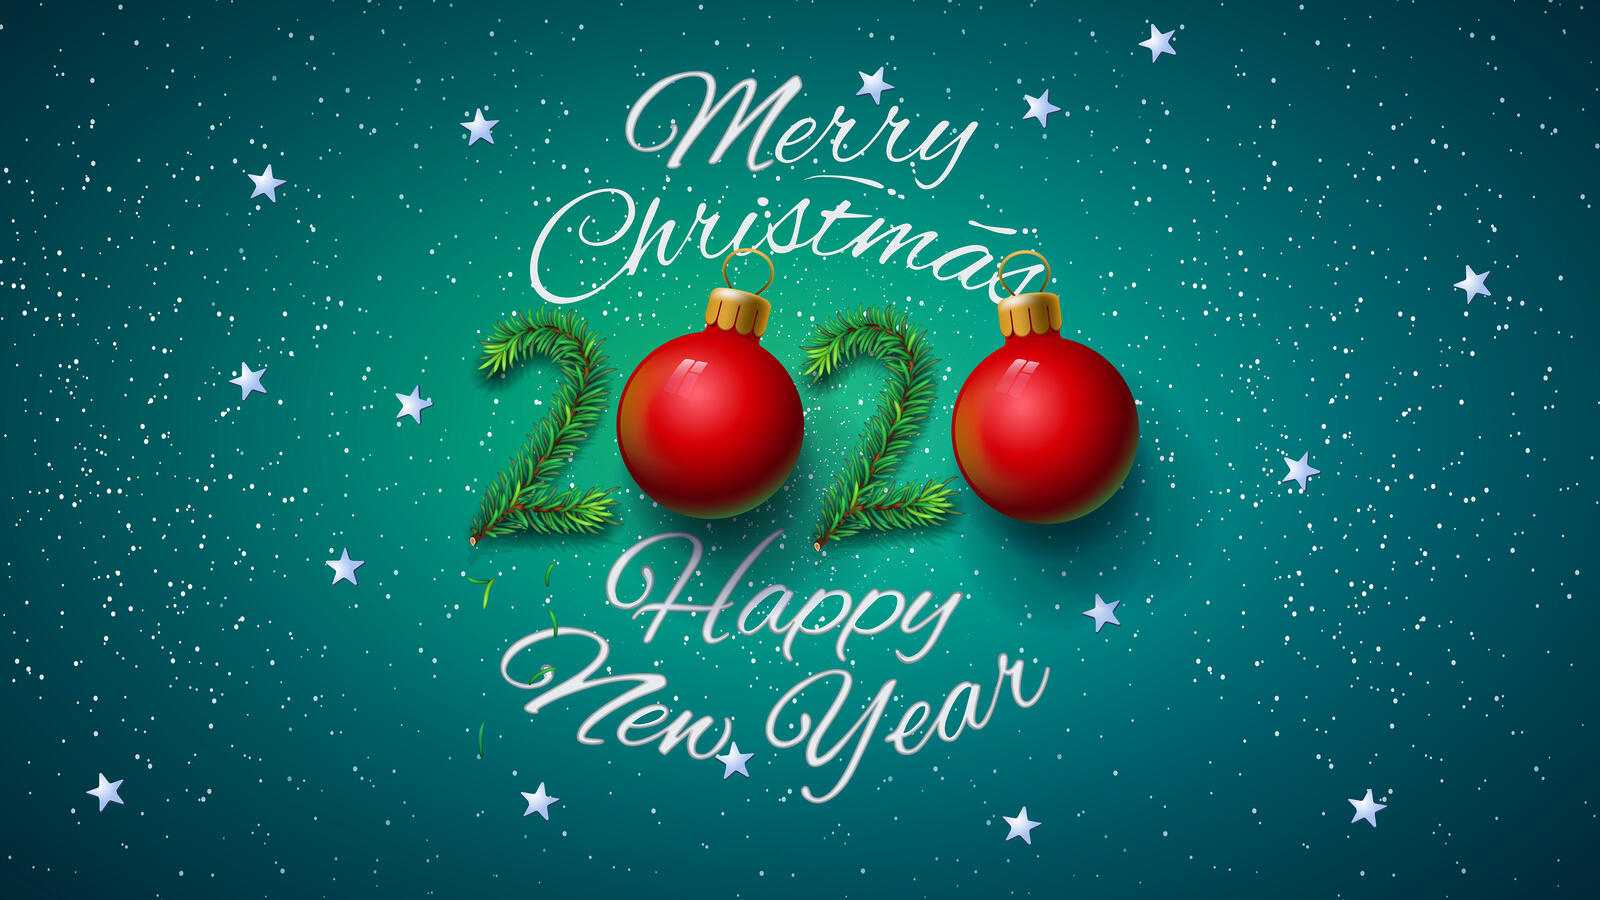 Wallpapers 2020 merry Christmas happy new year on the desktop